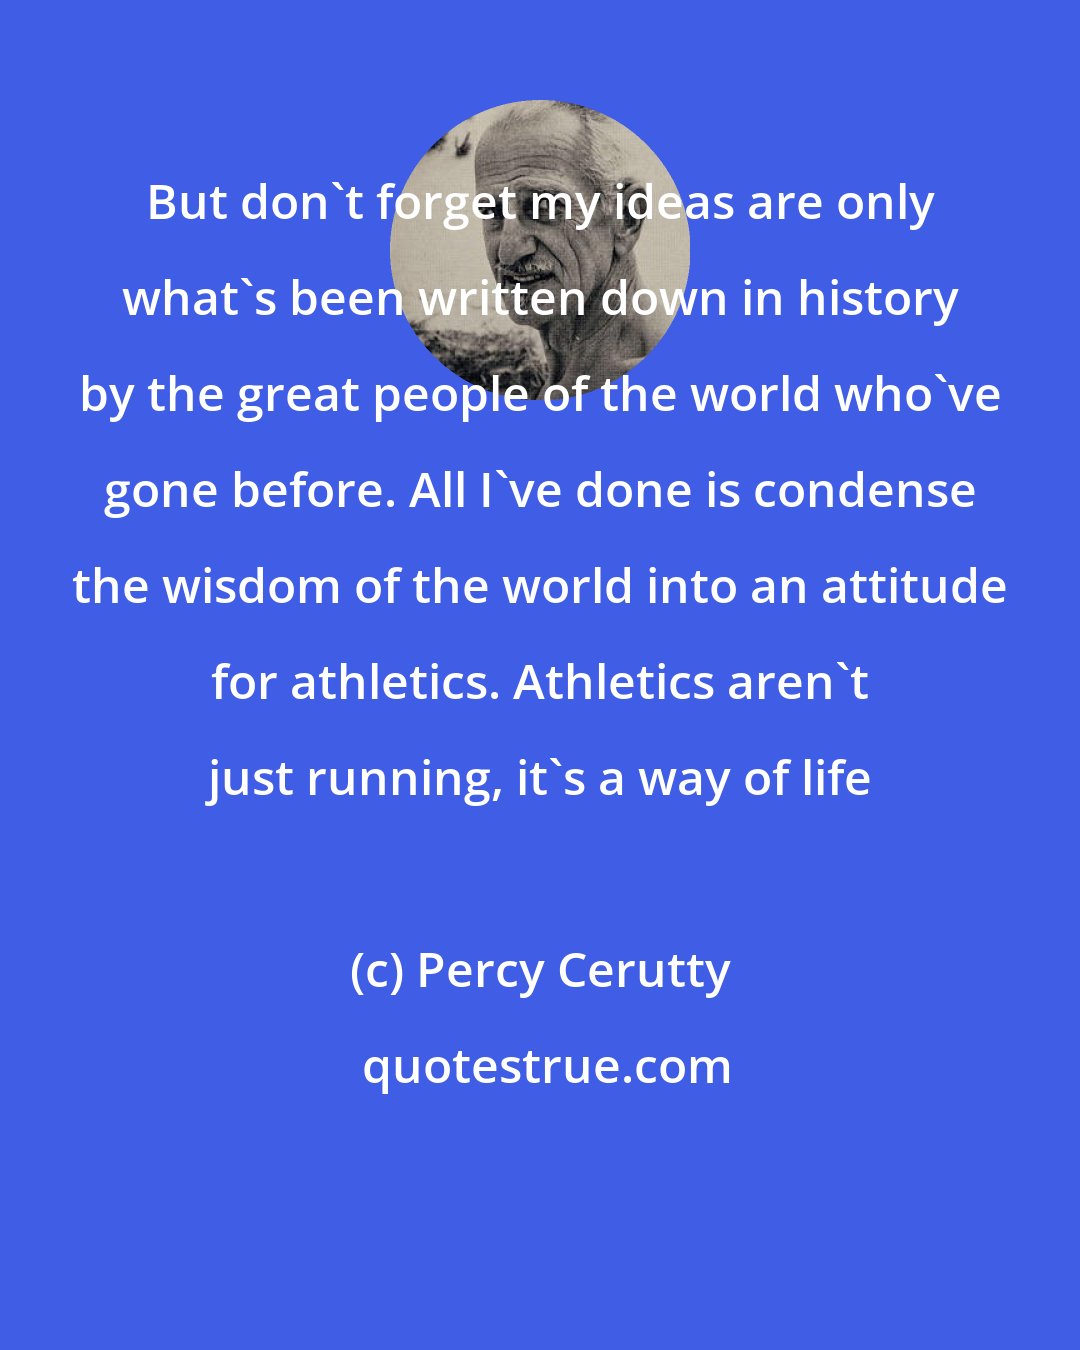 Percy Cerutty: But don't forget my ideas are only what's been written down in history by the great people of the world who've gone before. All I've done is condense the wisdom of the world into an attitude for athletics. Athletics aren't just running, it's a way of life